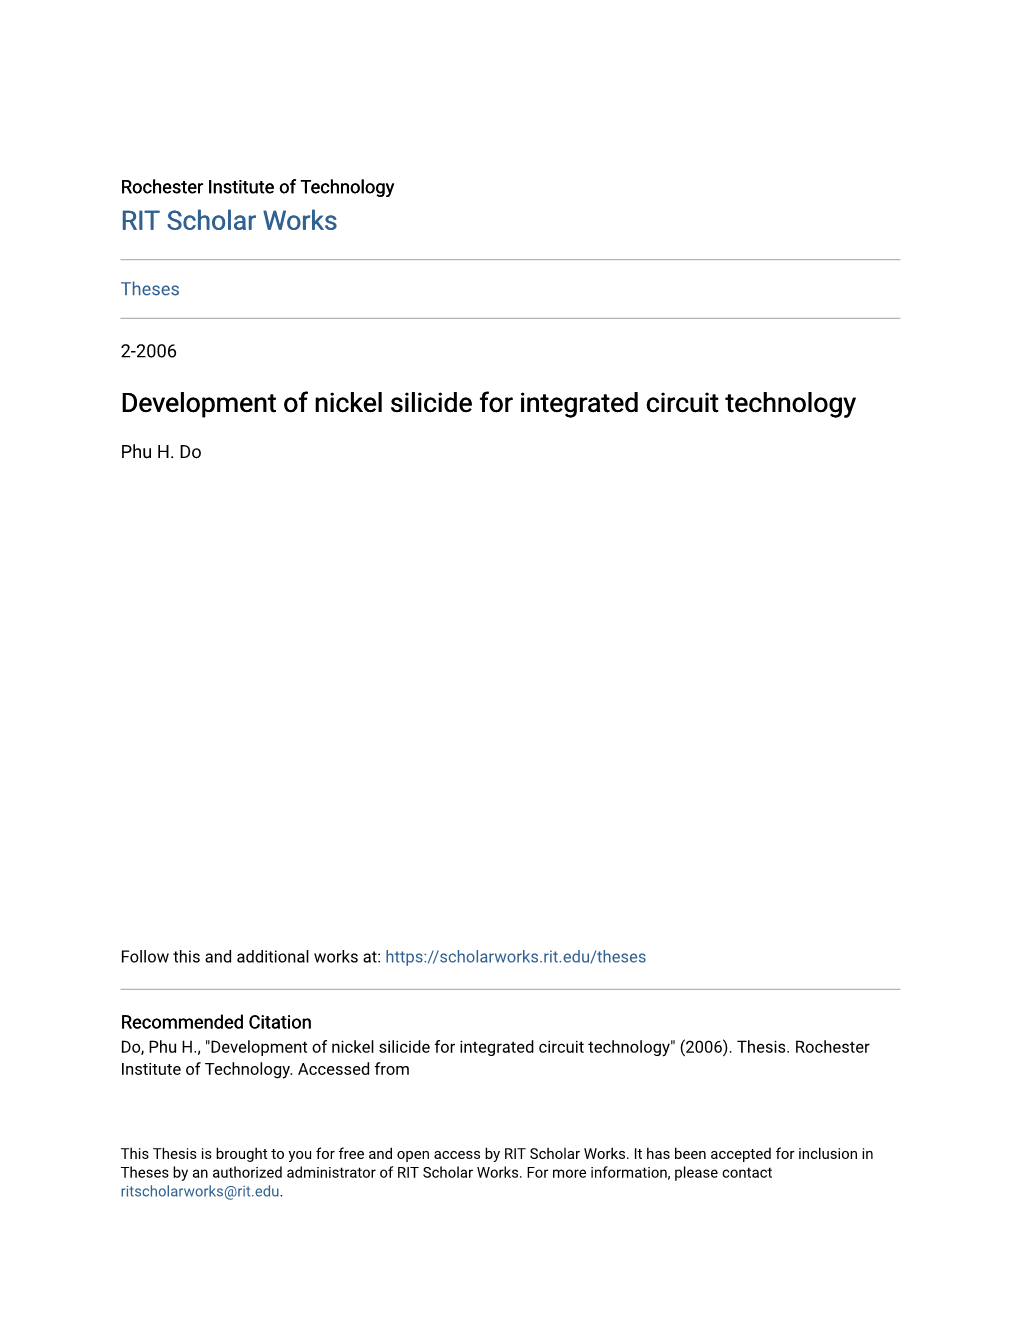 Development of Nickel Silicide for Integrated Circuit Technology